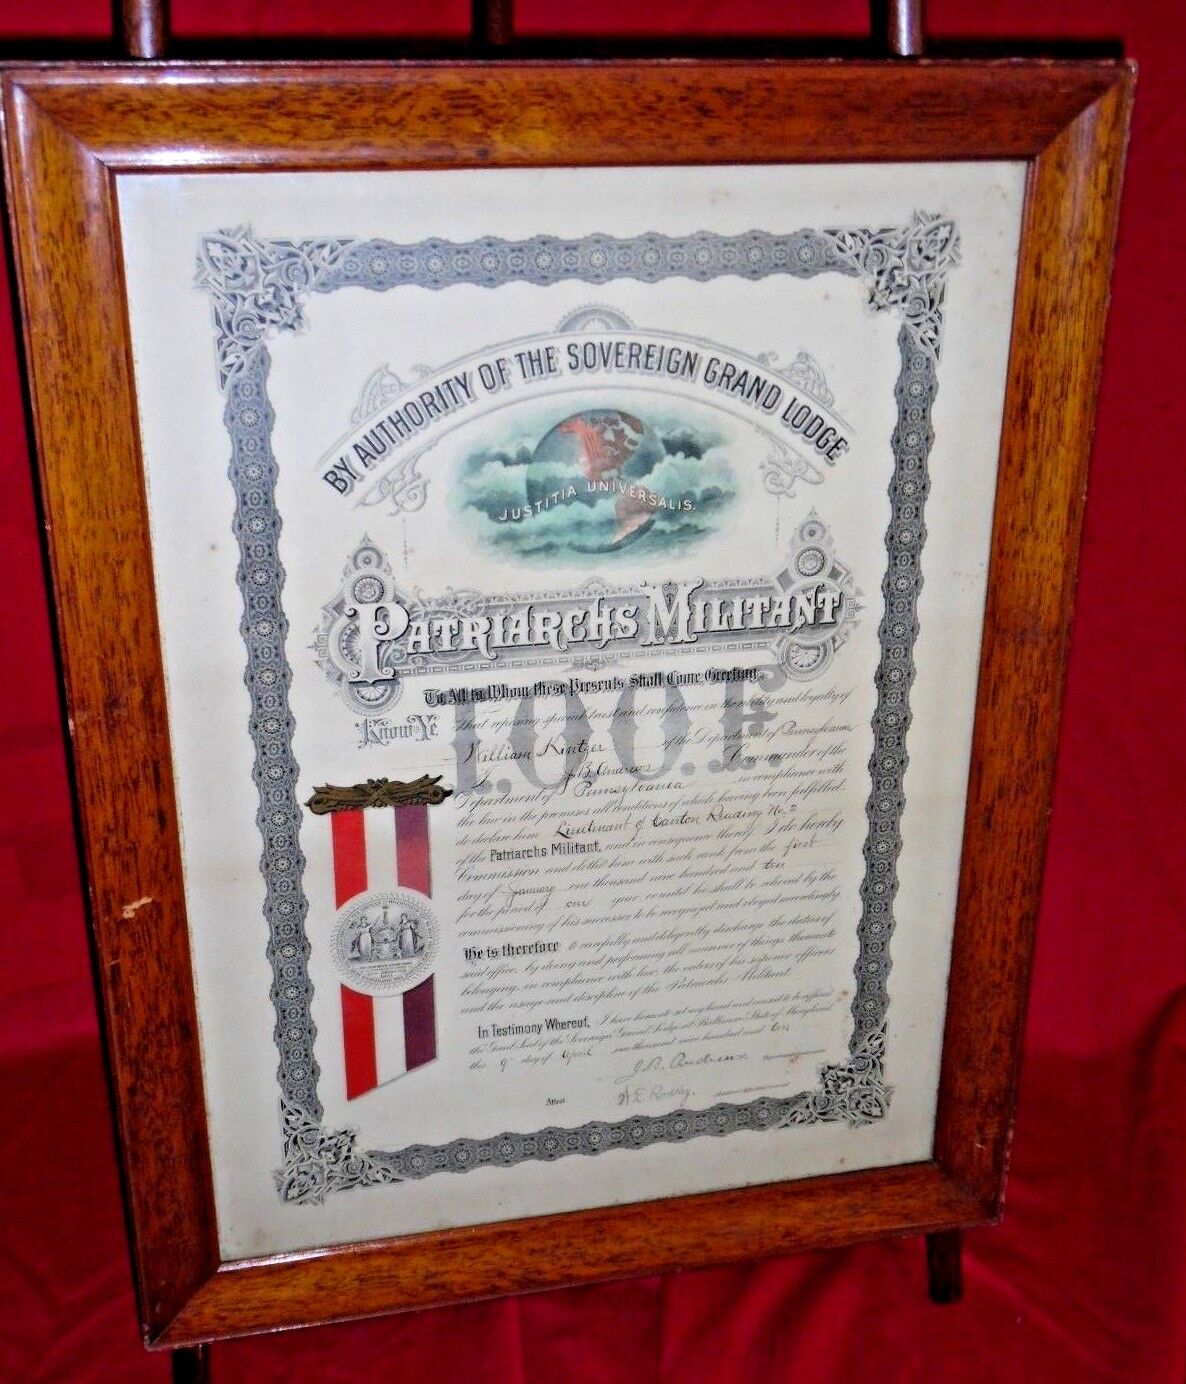 IOOF Independent Order Odd Fellows Patriarchs Militant Certificate Reading PA #2